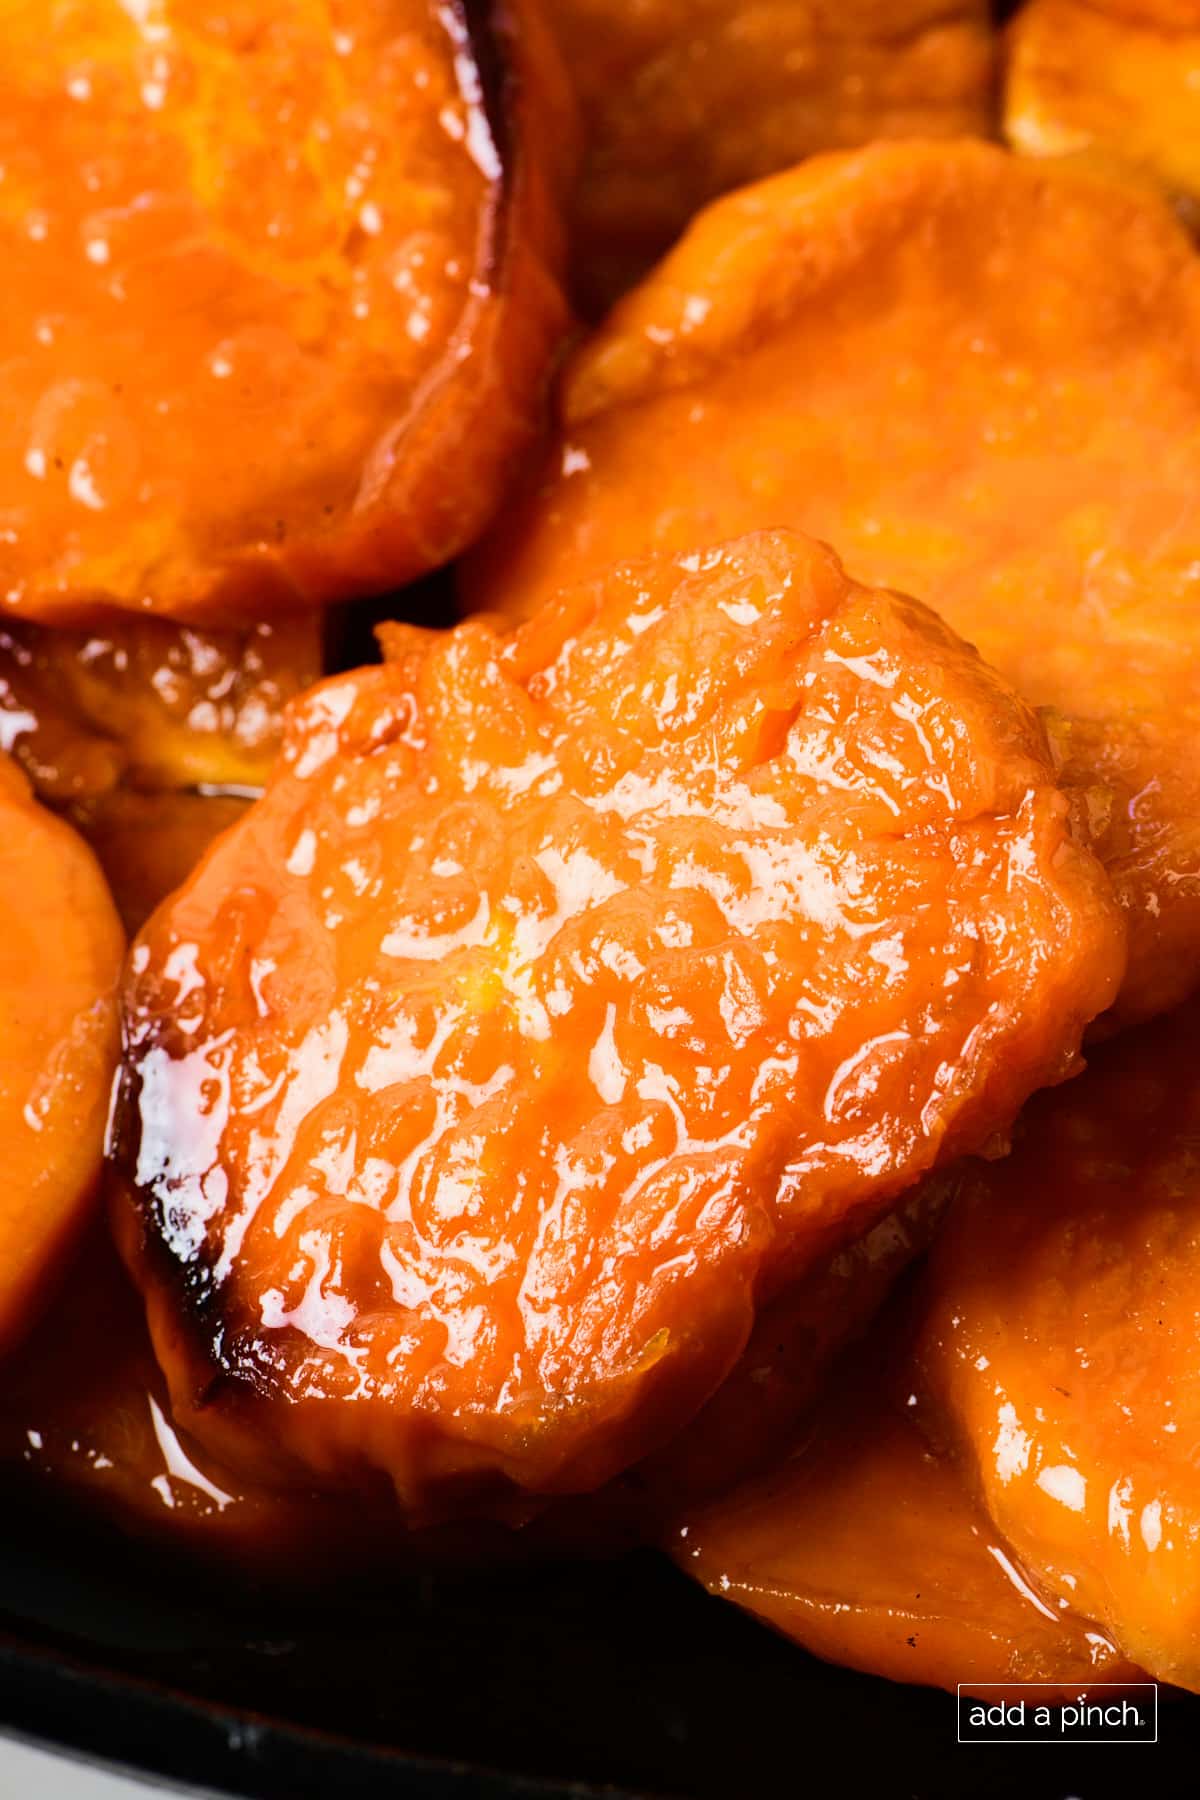 Candied sweet potatoes with buttery sweet glaze.